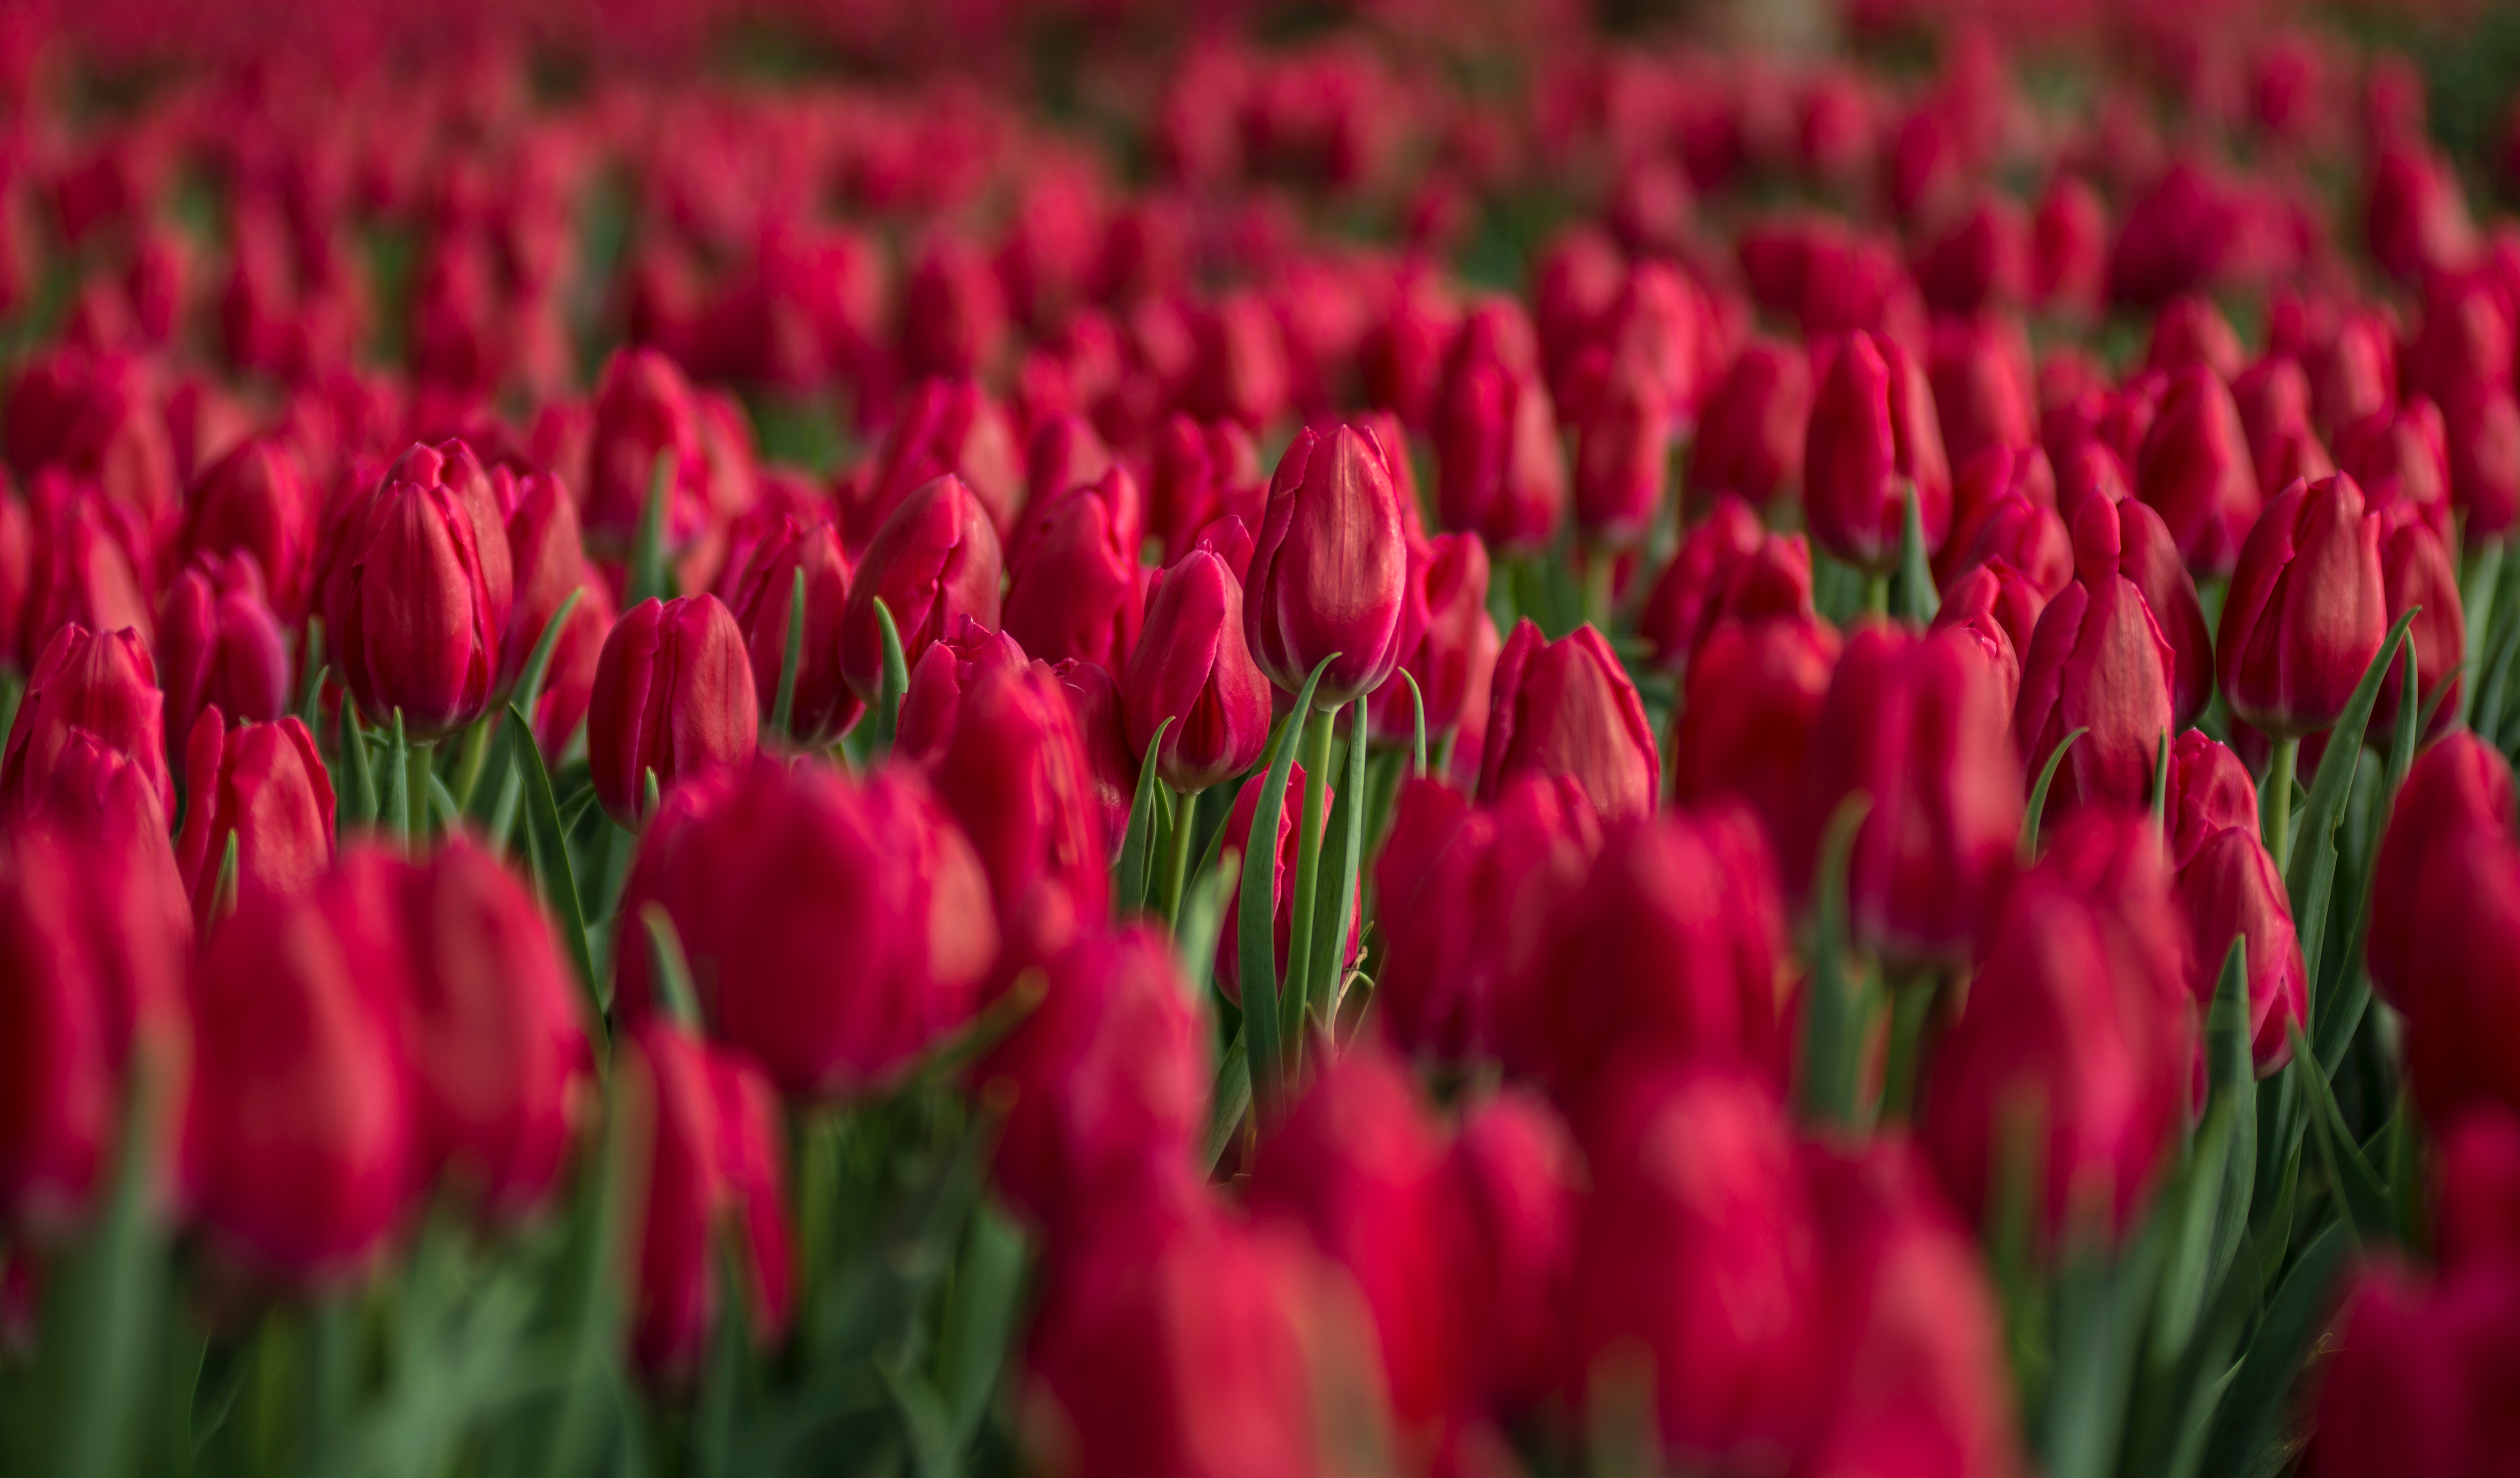 Red tulip flower field close-up photo